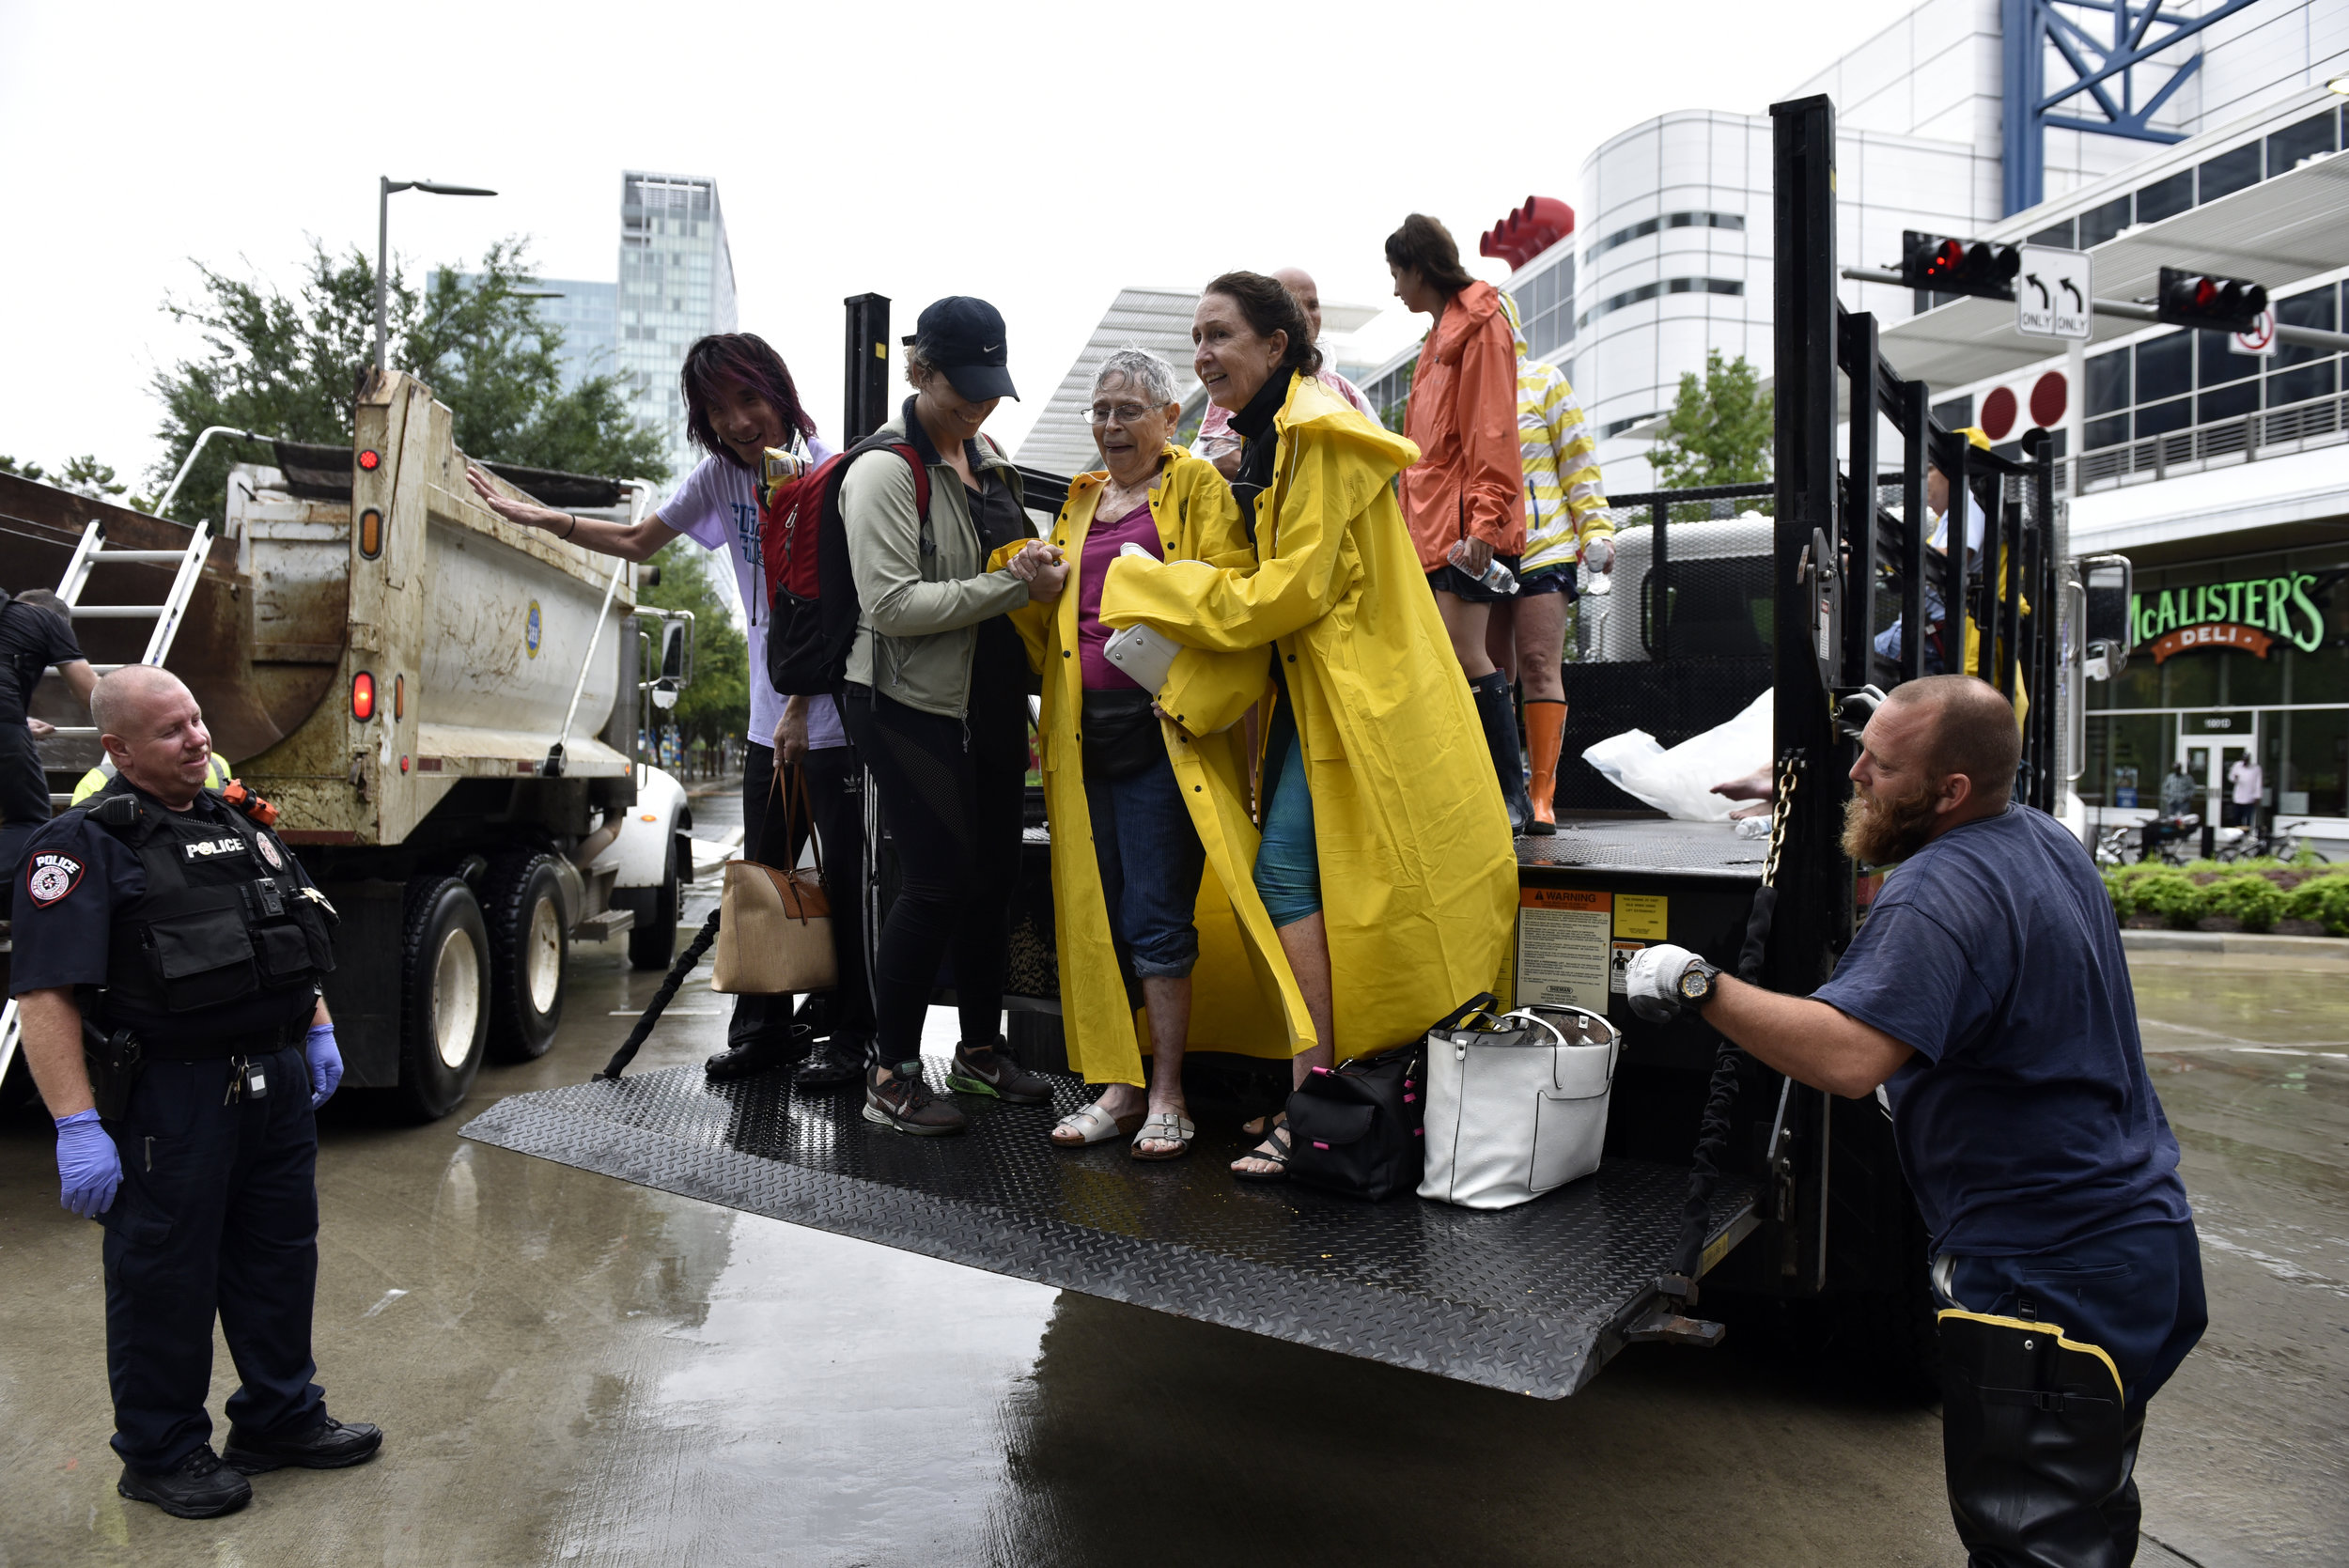  Evacuees are unloaded from the back of an open bed truck at the George R. Brown Convention Center after Hurricane Harvey inundated the Texas Gulf coast with rain causing widespread flooding, in Houston, Texas, U.S. August 27, 2017.  REUTERS/Nick Oxf